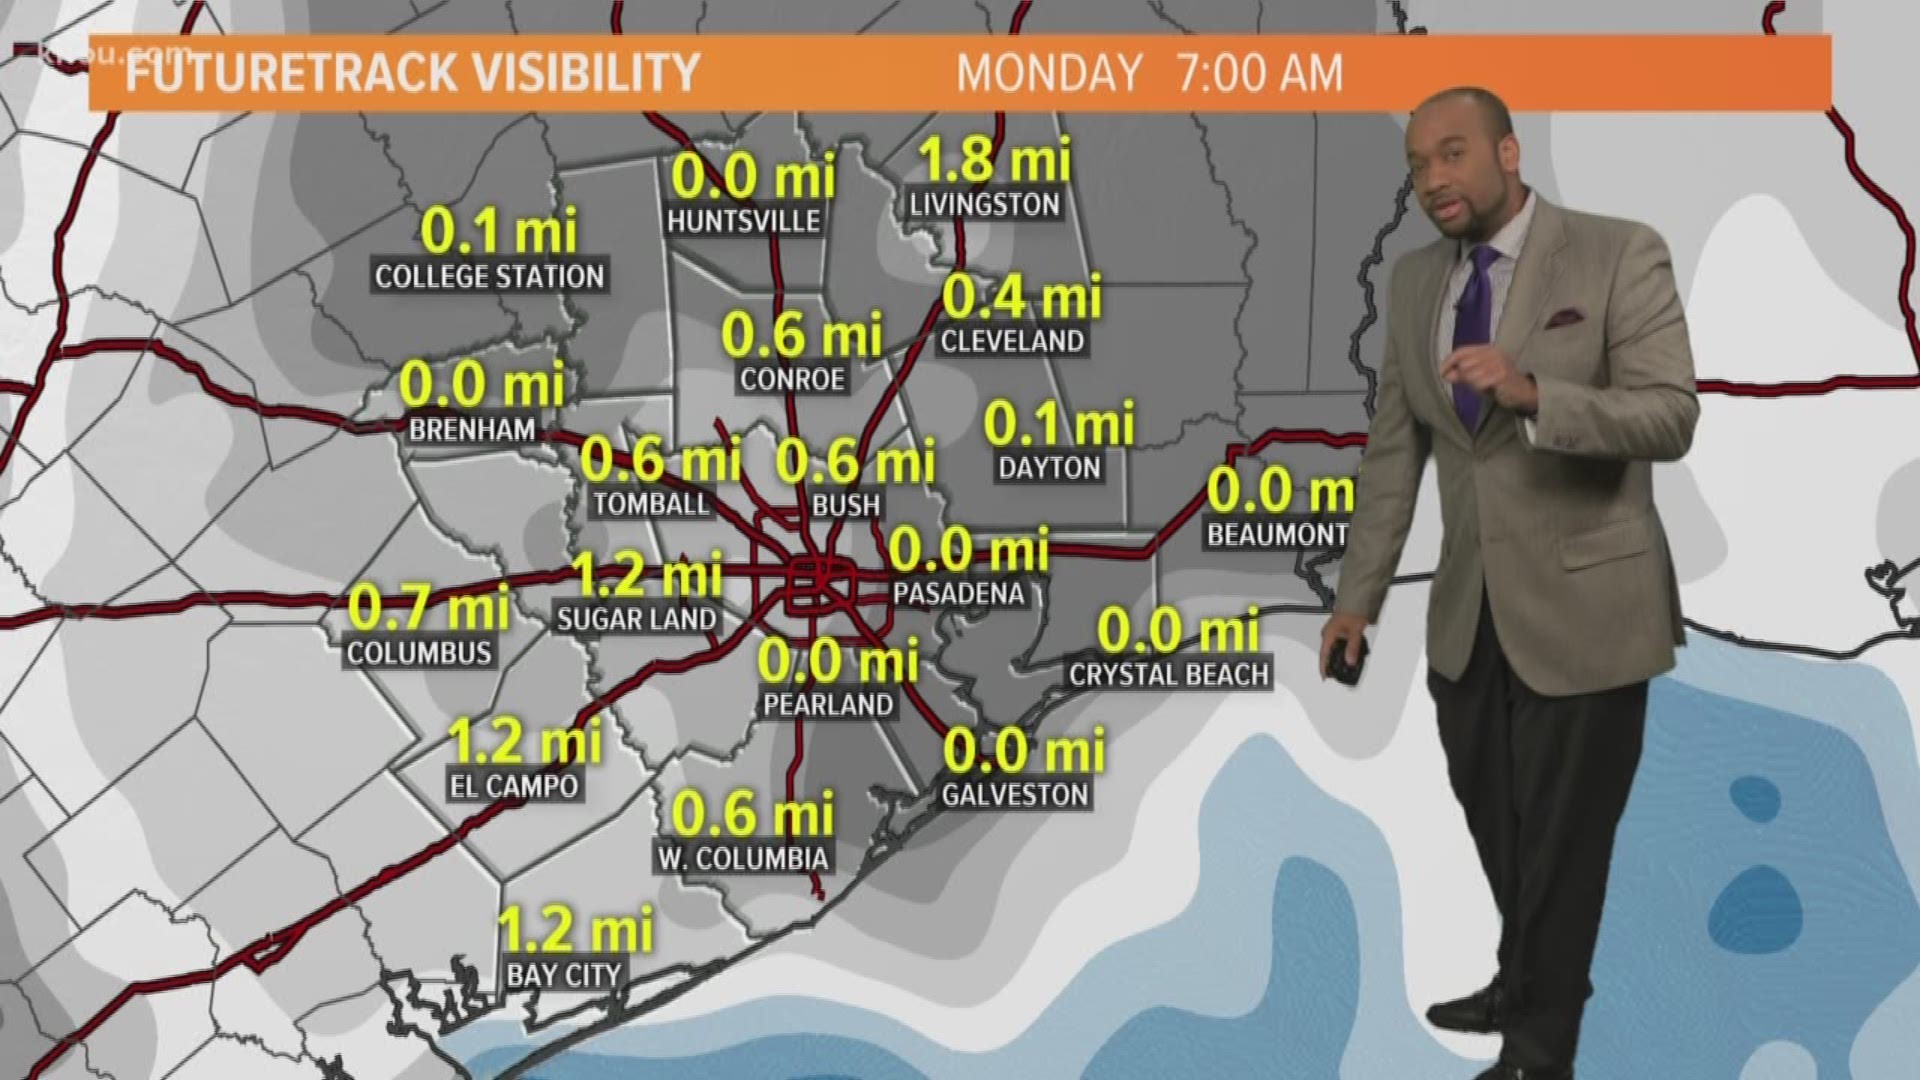 Be On The Lookout For Patchy To Dense Fog Overnight Tonight, Into Monday Morning Commute